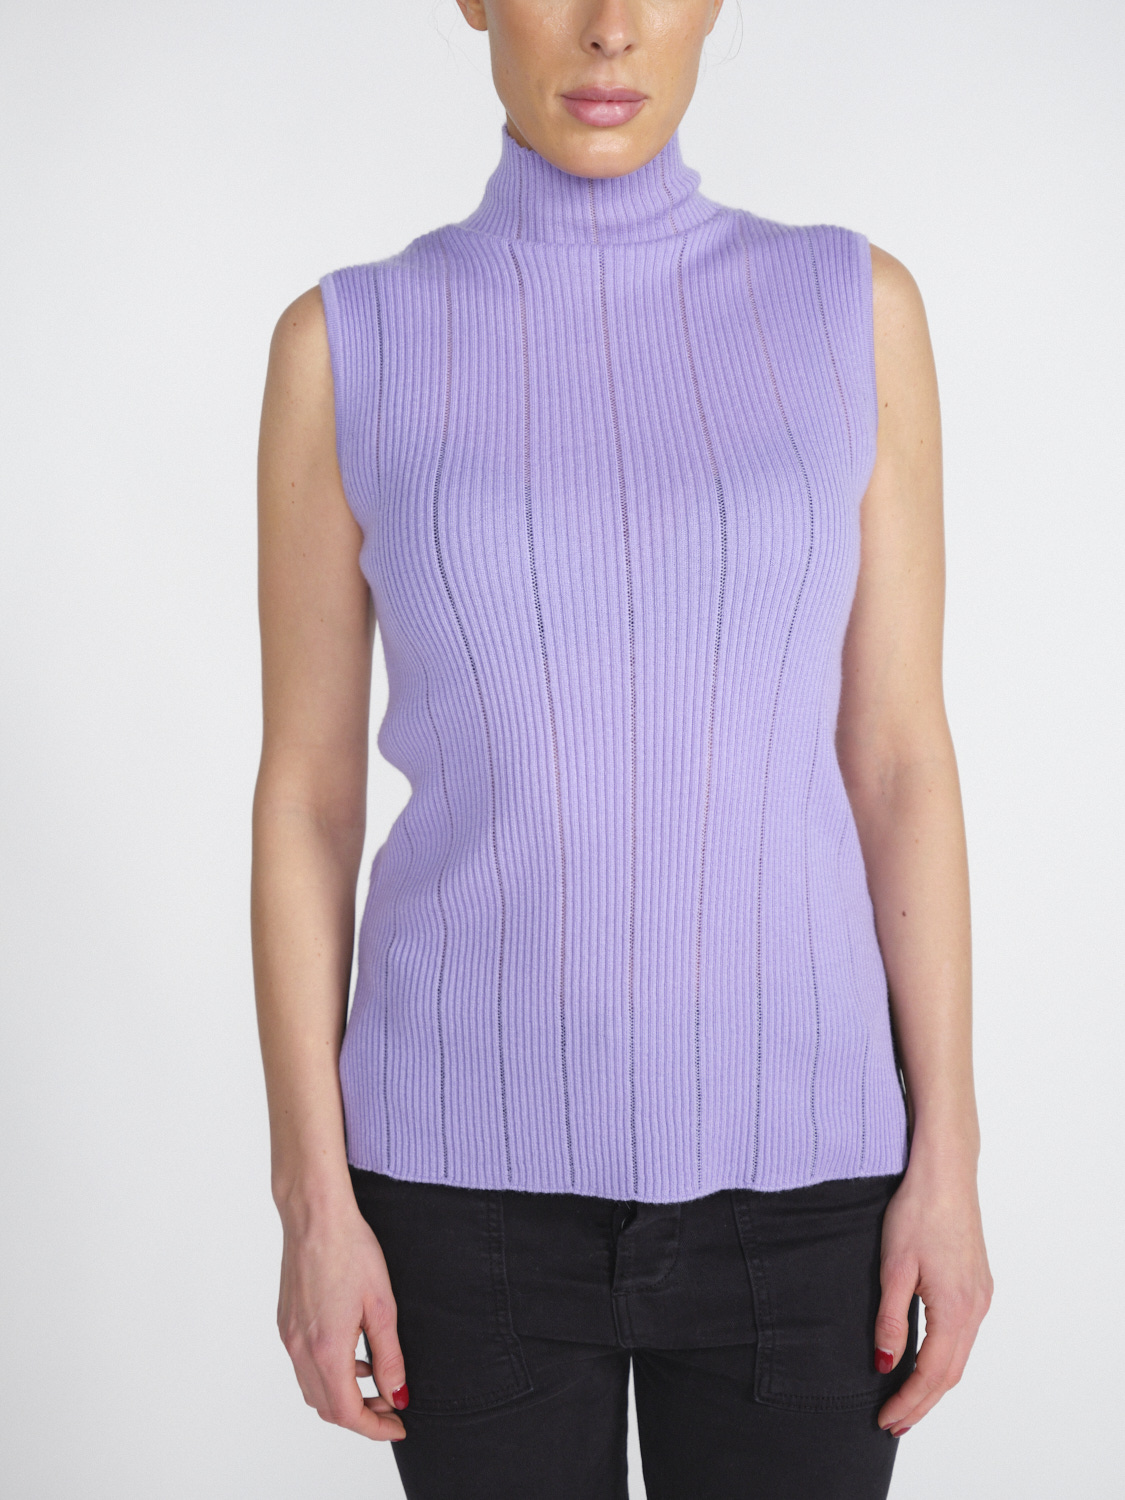 Loulou - Knitted top in cashmere-silk blend 